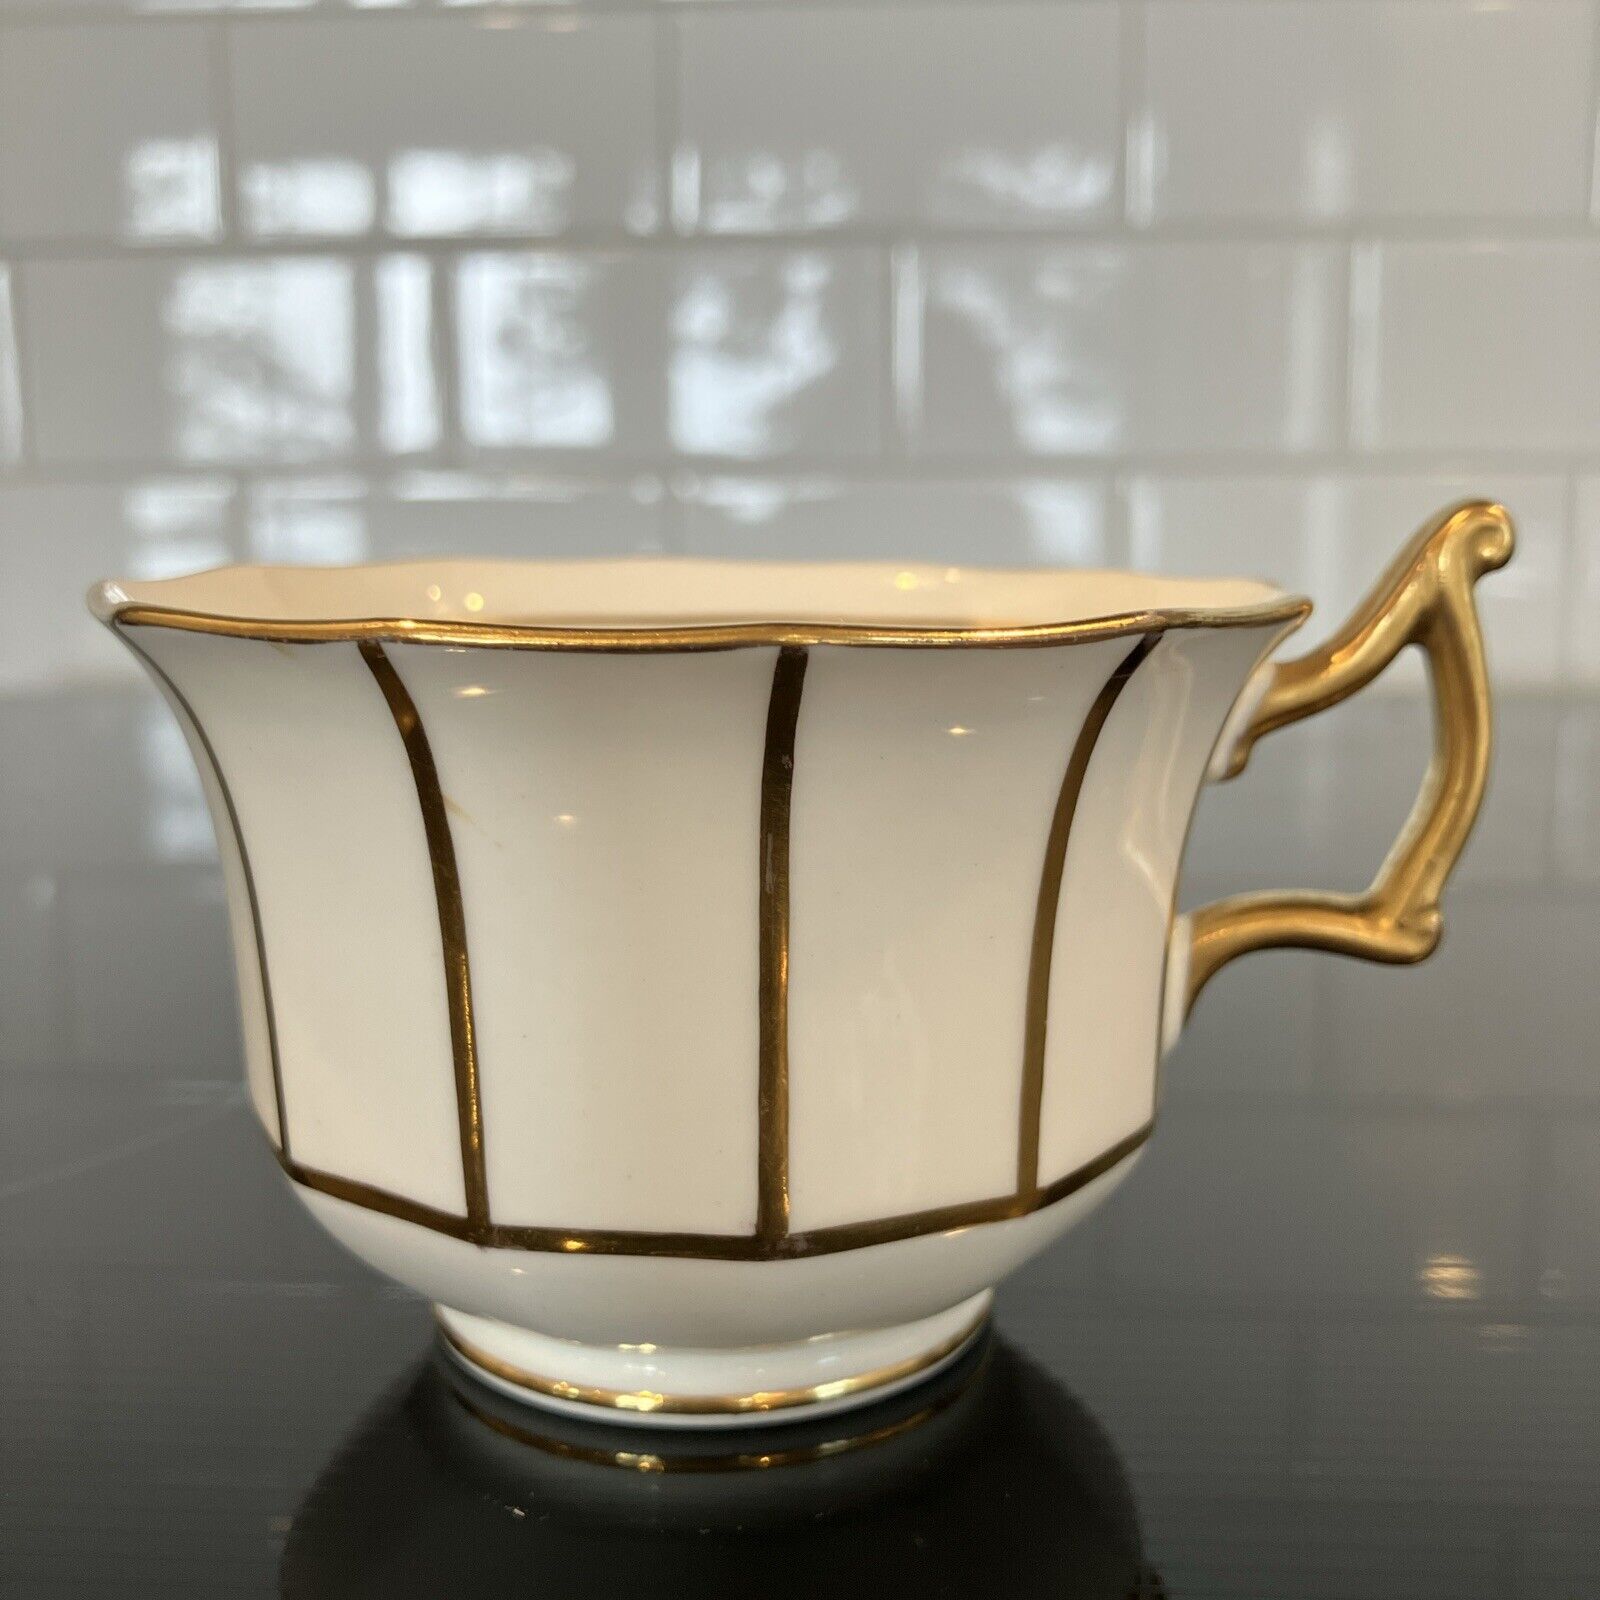 Antique Caulden China Tea Cup, Made for Tiffany & Co., NY, Gold Trim